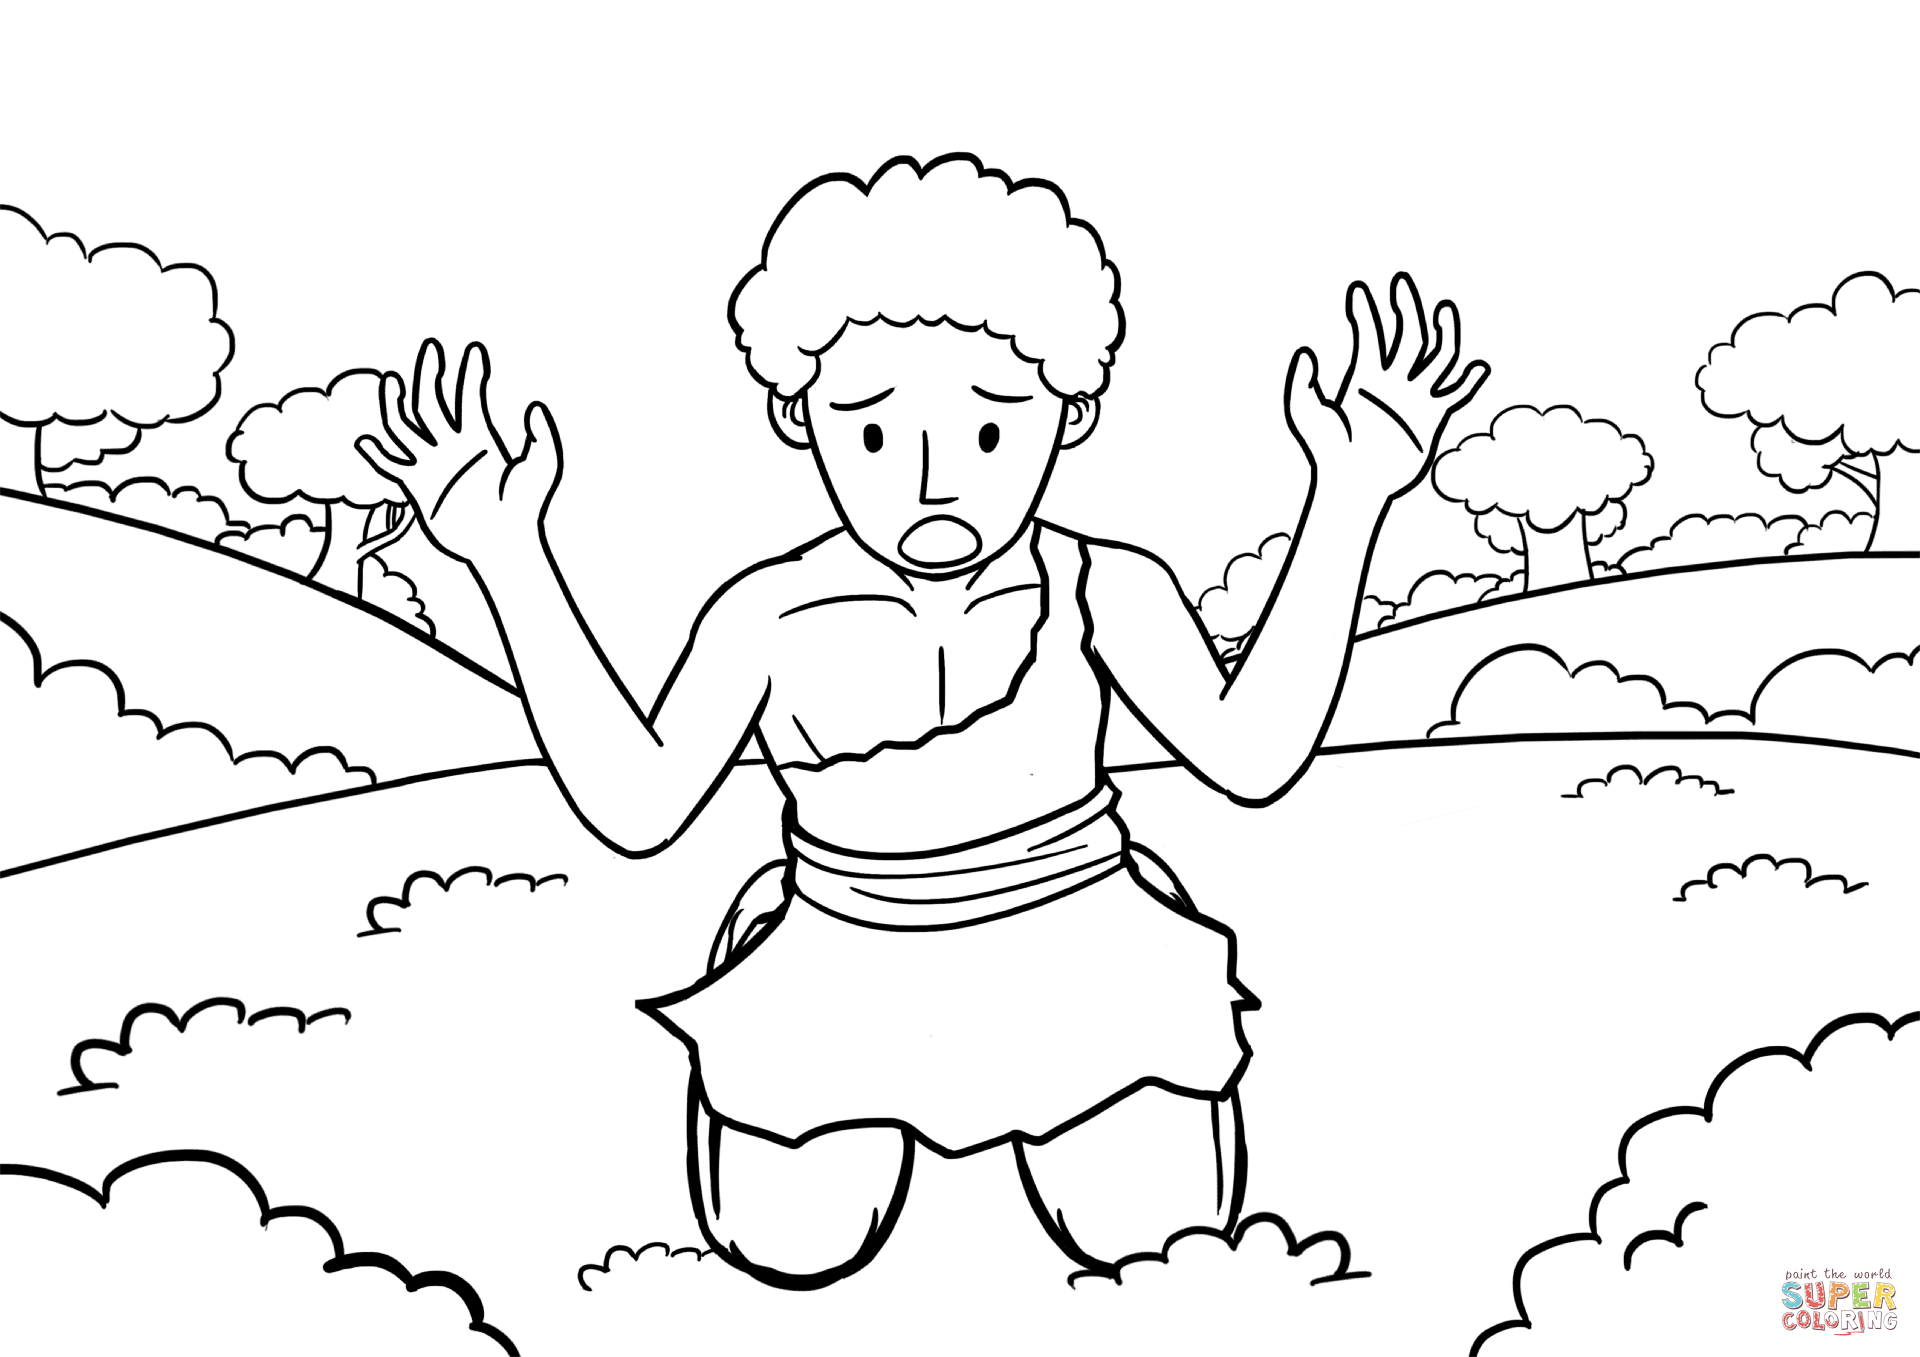 Cains repentance coloring page free printable coloring pages